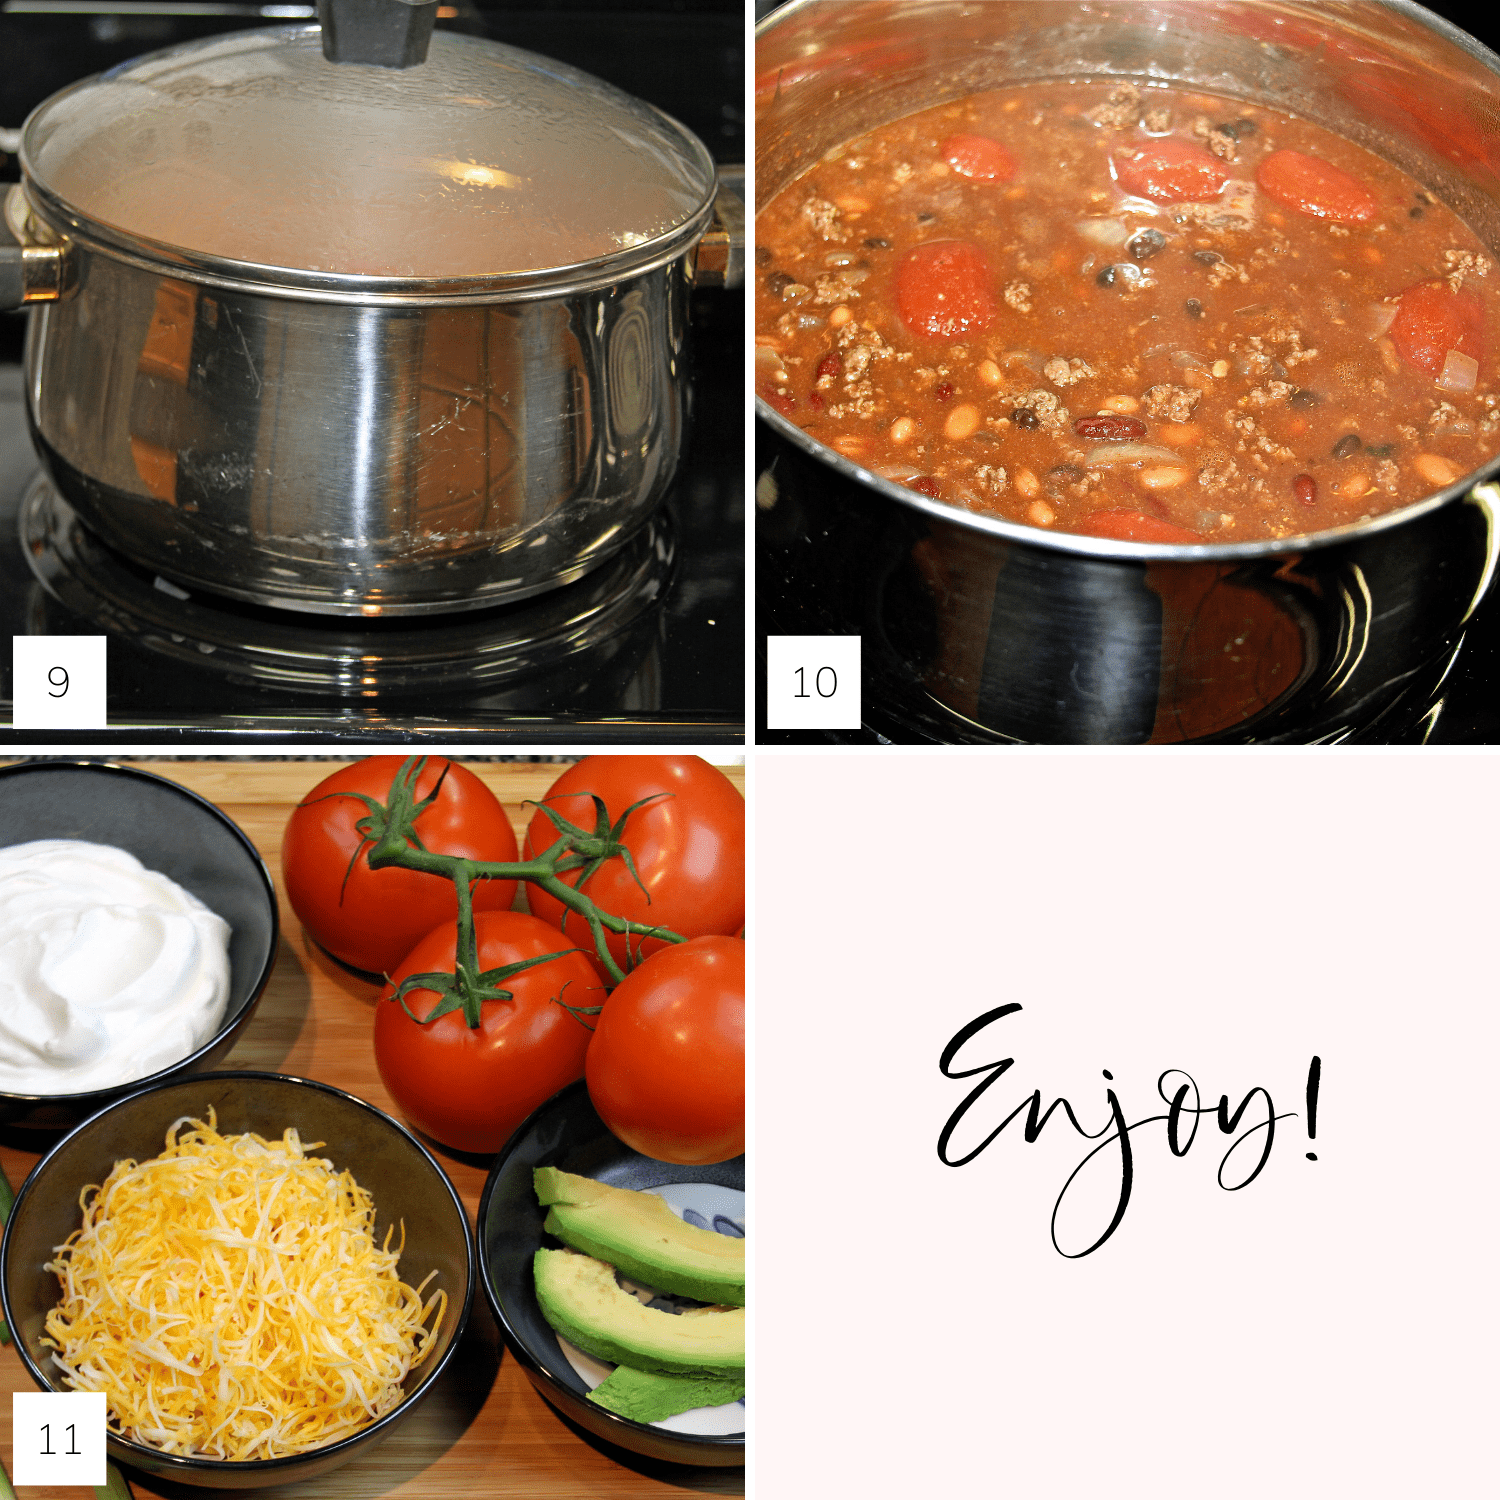 How To Make Simple & Quick Chili